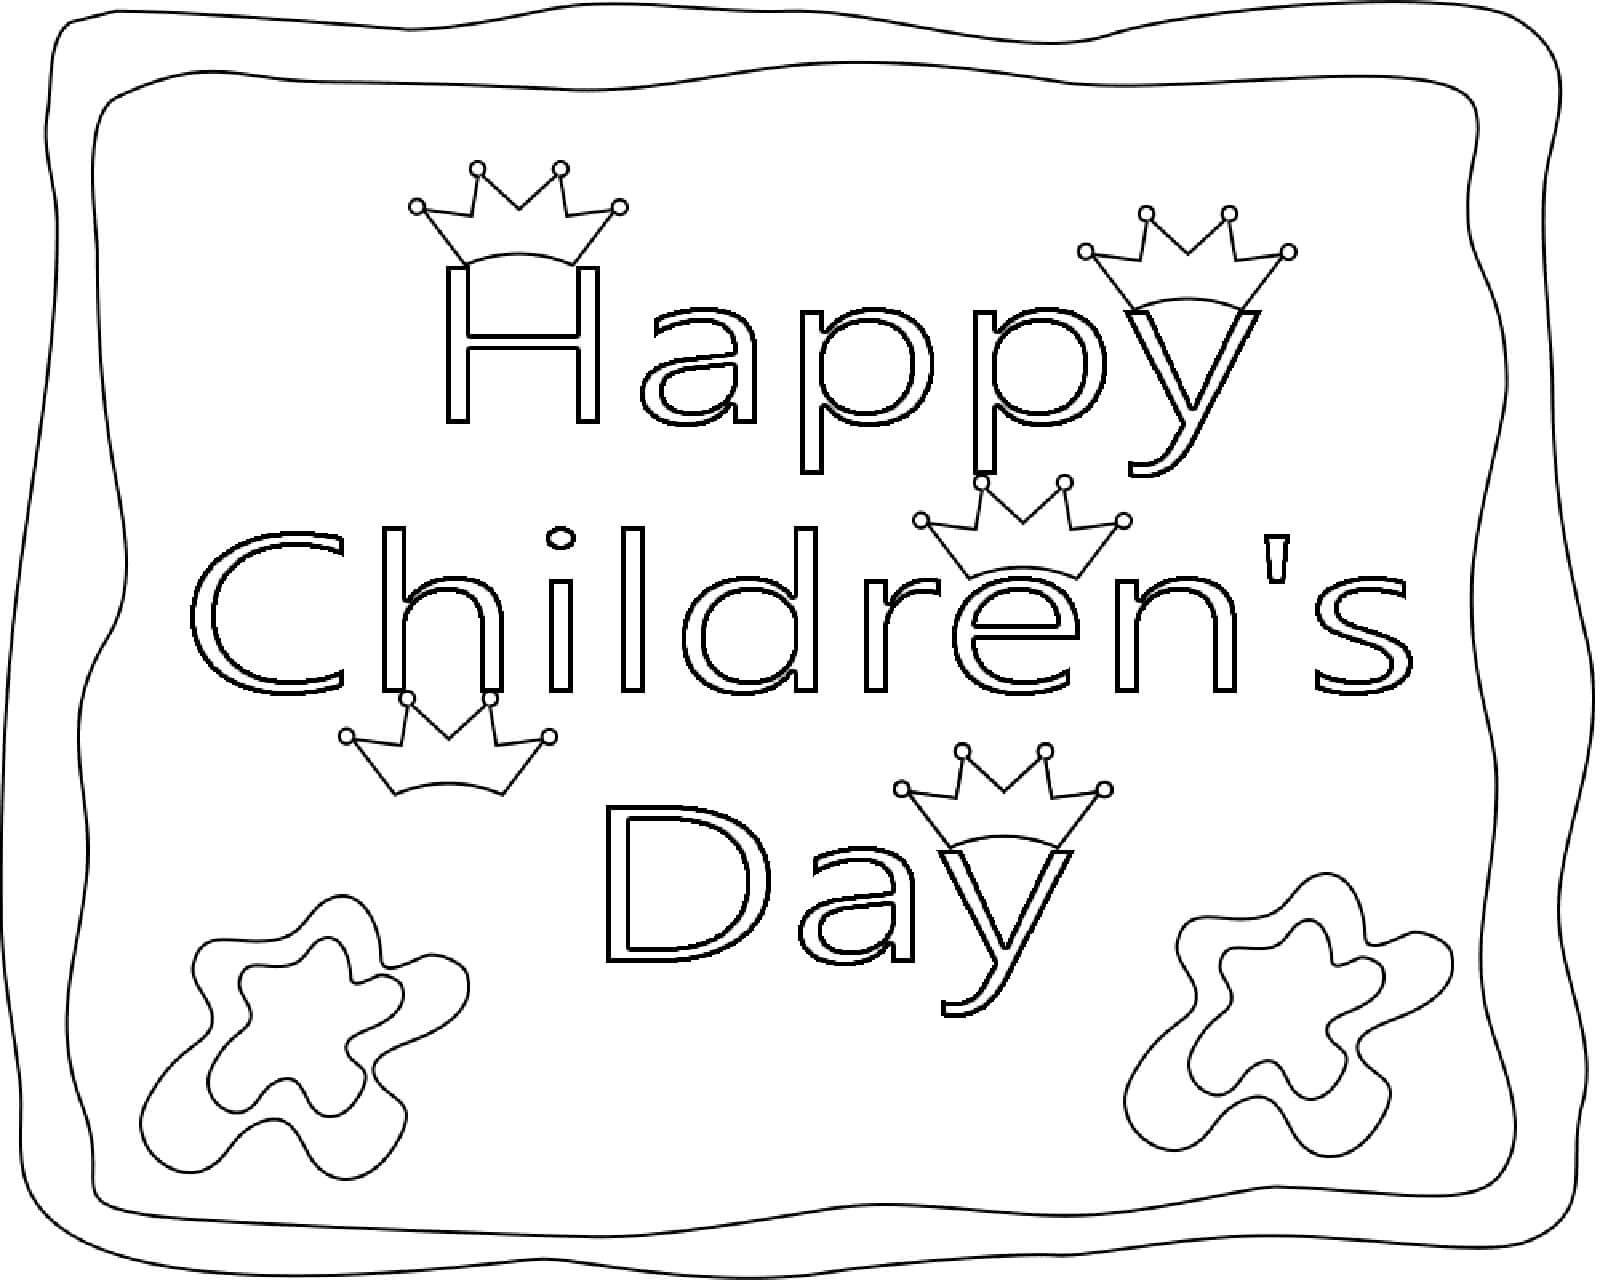 OUR CHILDRENS DAY - Art Starts